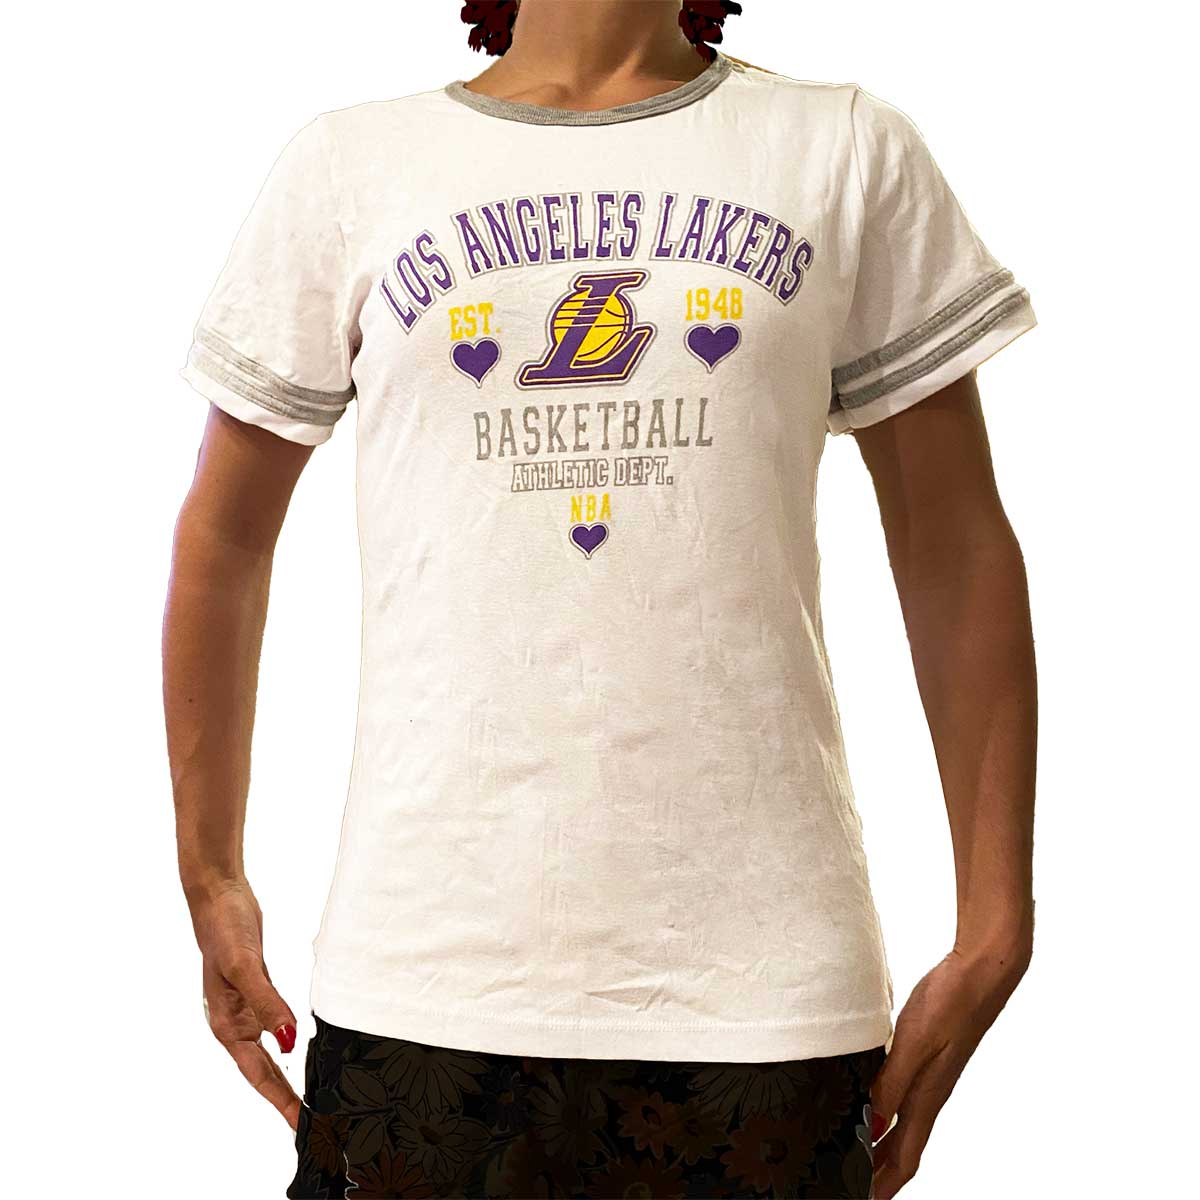 Womens Los Angeles Lakers Basketball Athletic Dept White T-Shirt MD